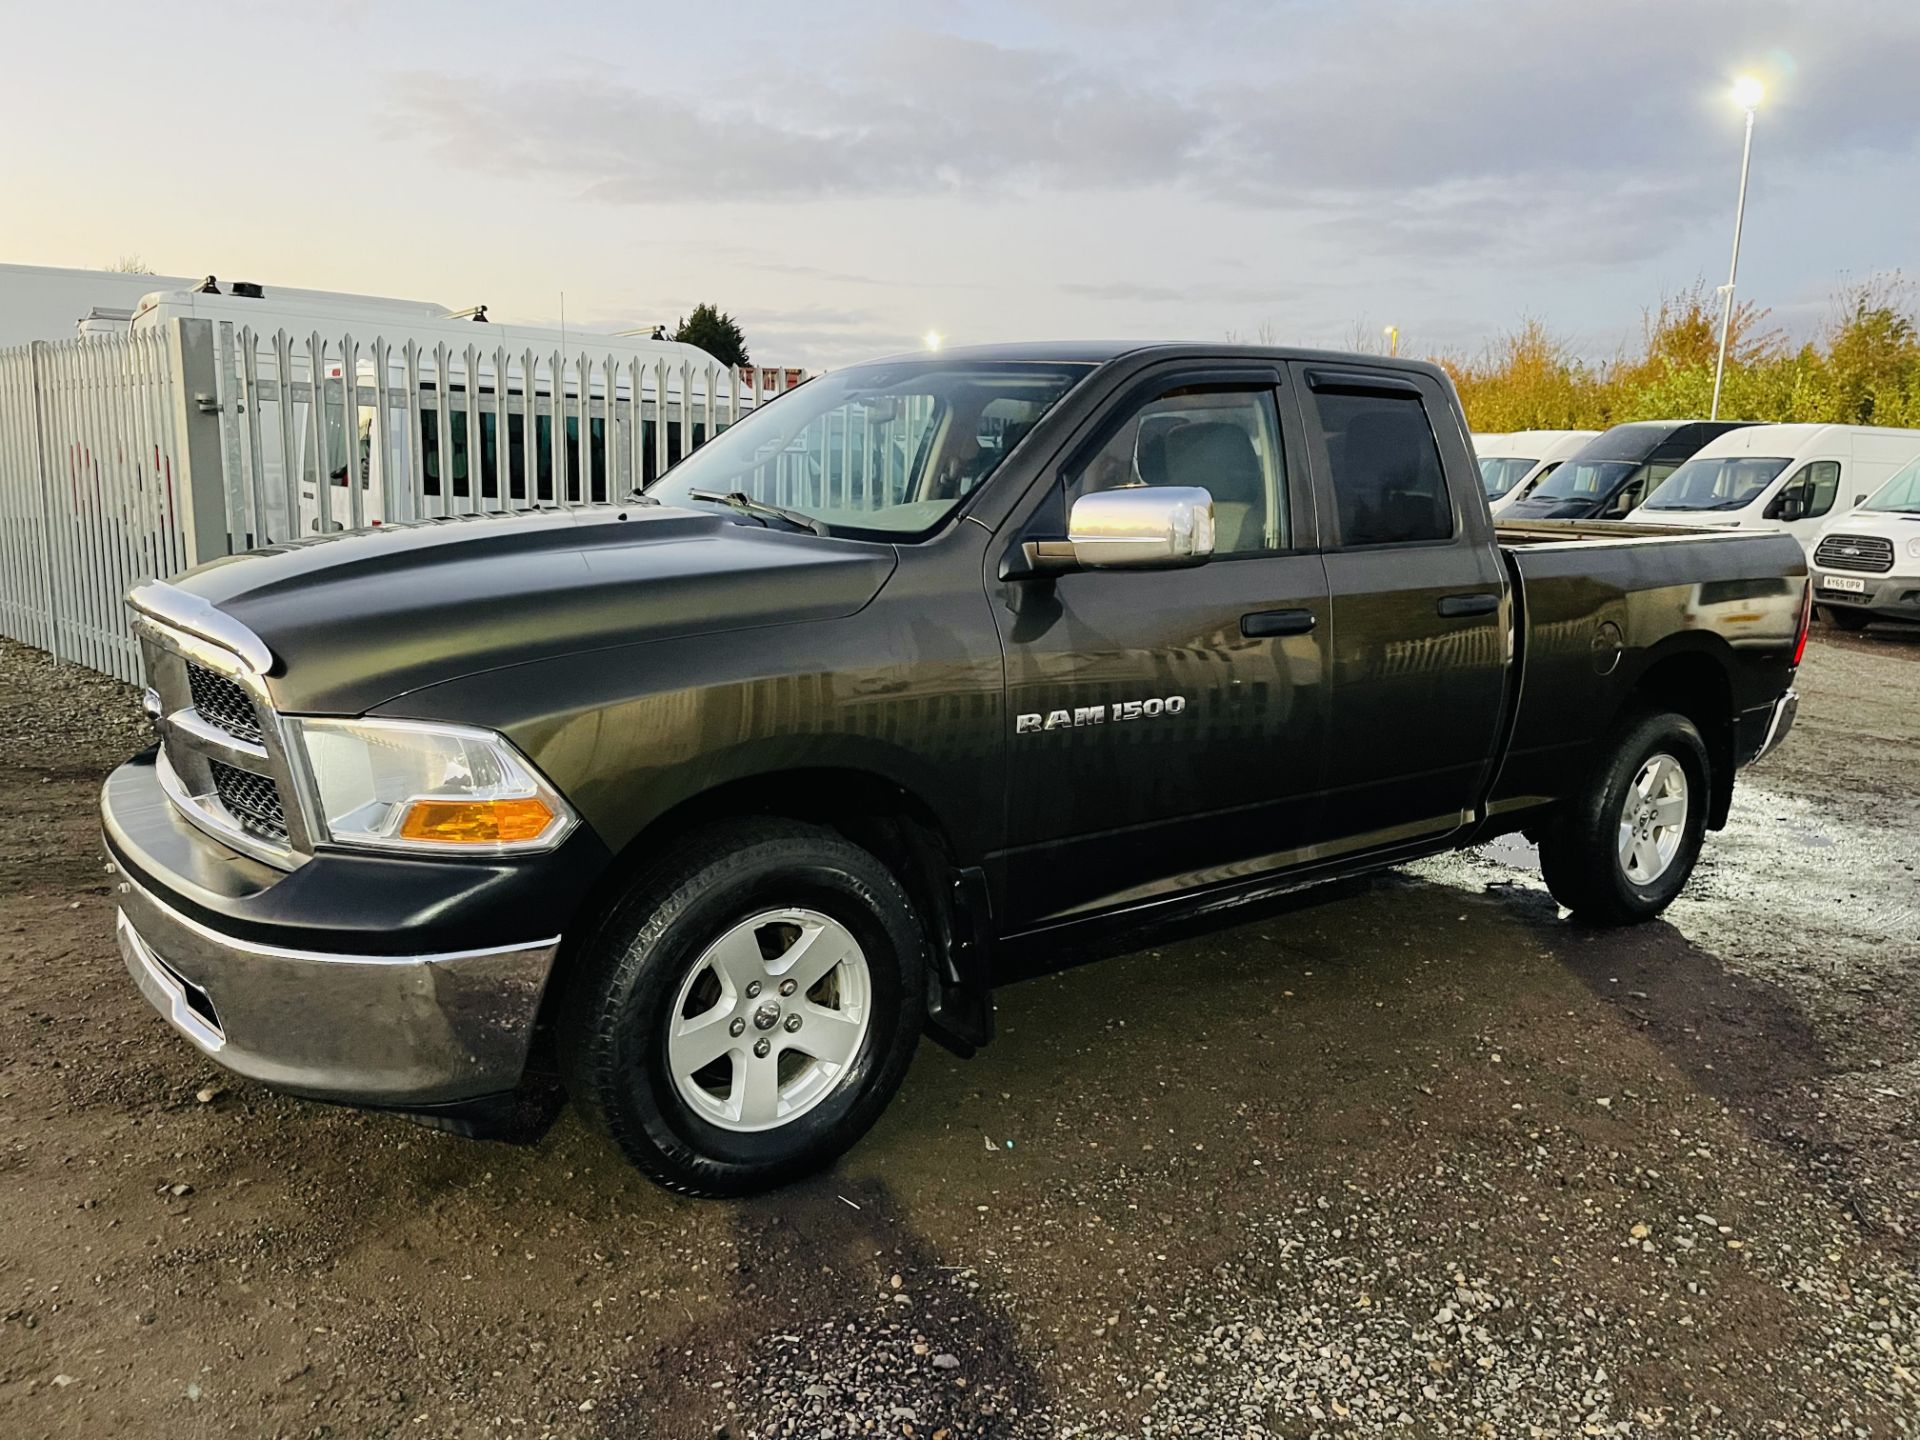 Dodge Ram 4.7 V8 1500 ST 4WD ' 2012 Year ' A/C - Cruise Control - 6 Seats - Chrome Pack - Image 13 of 27